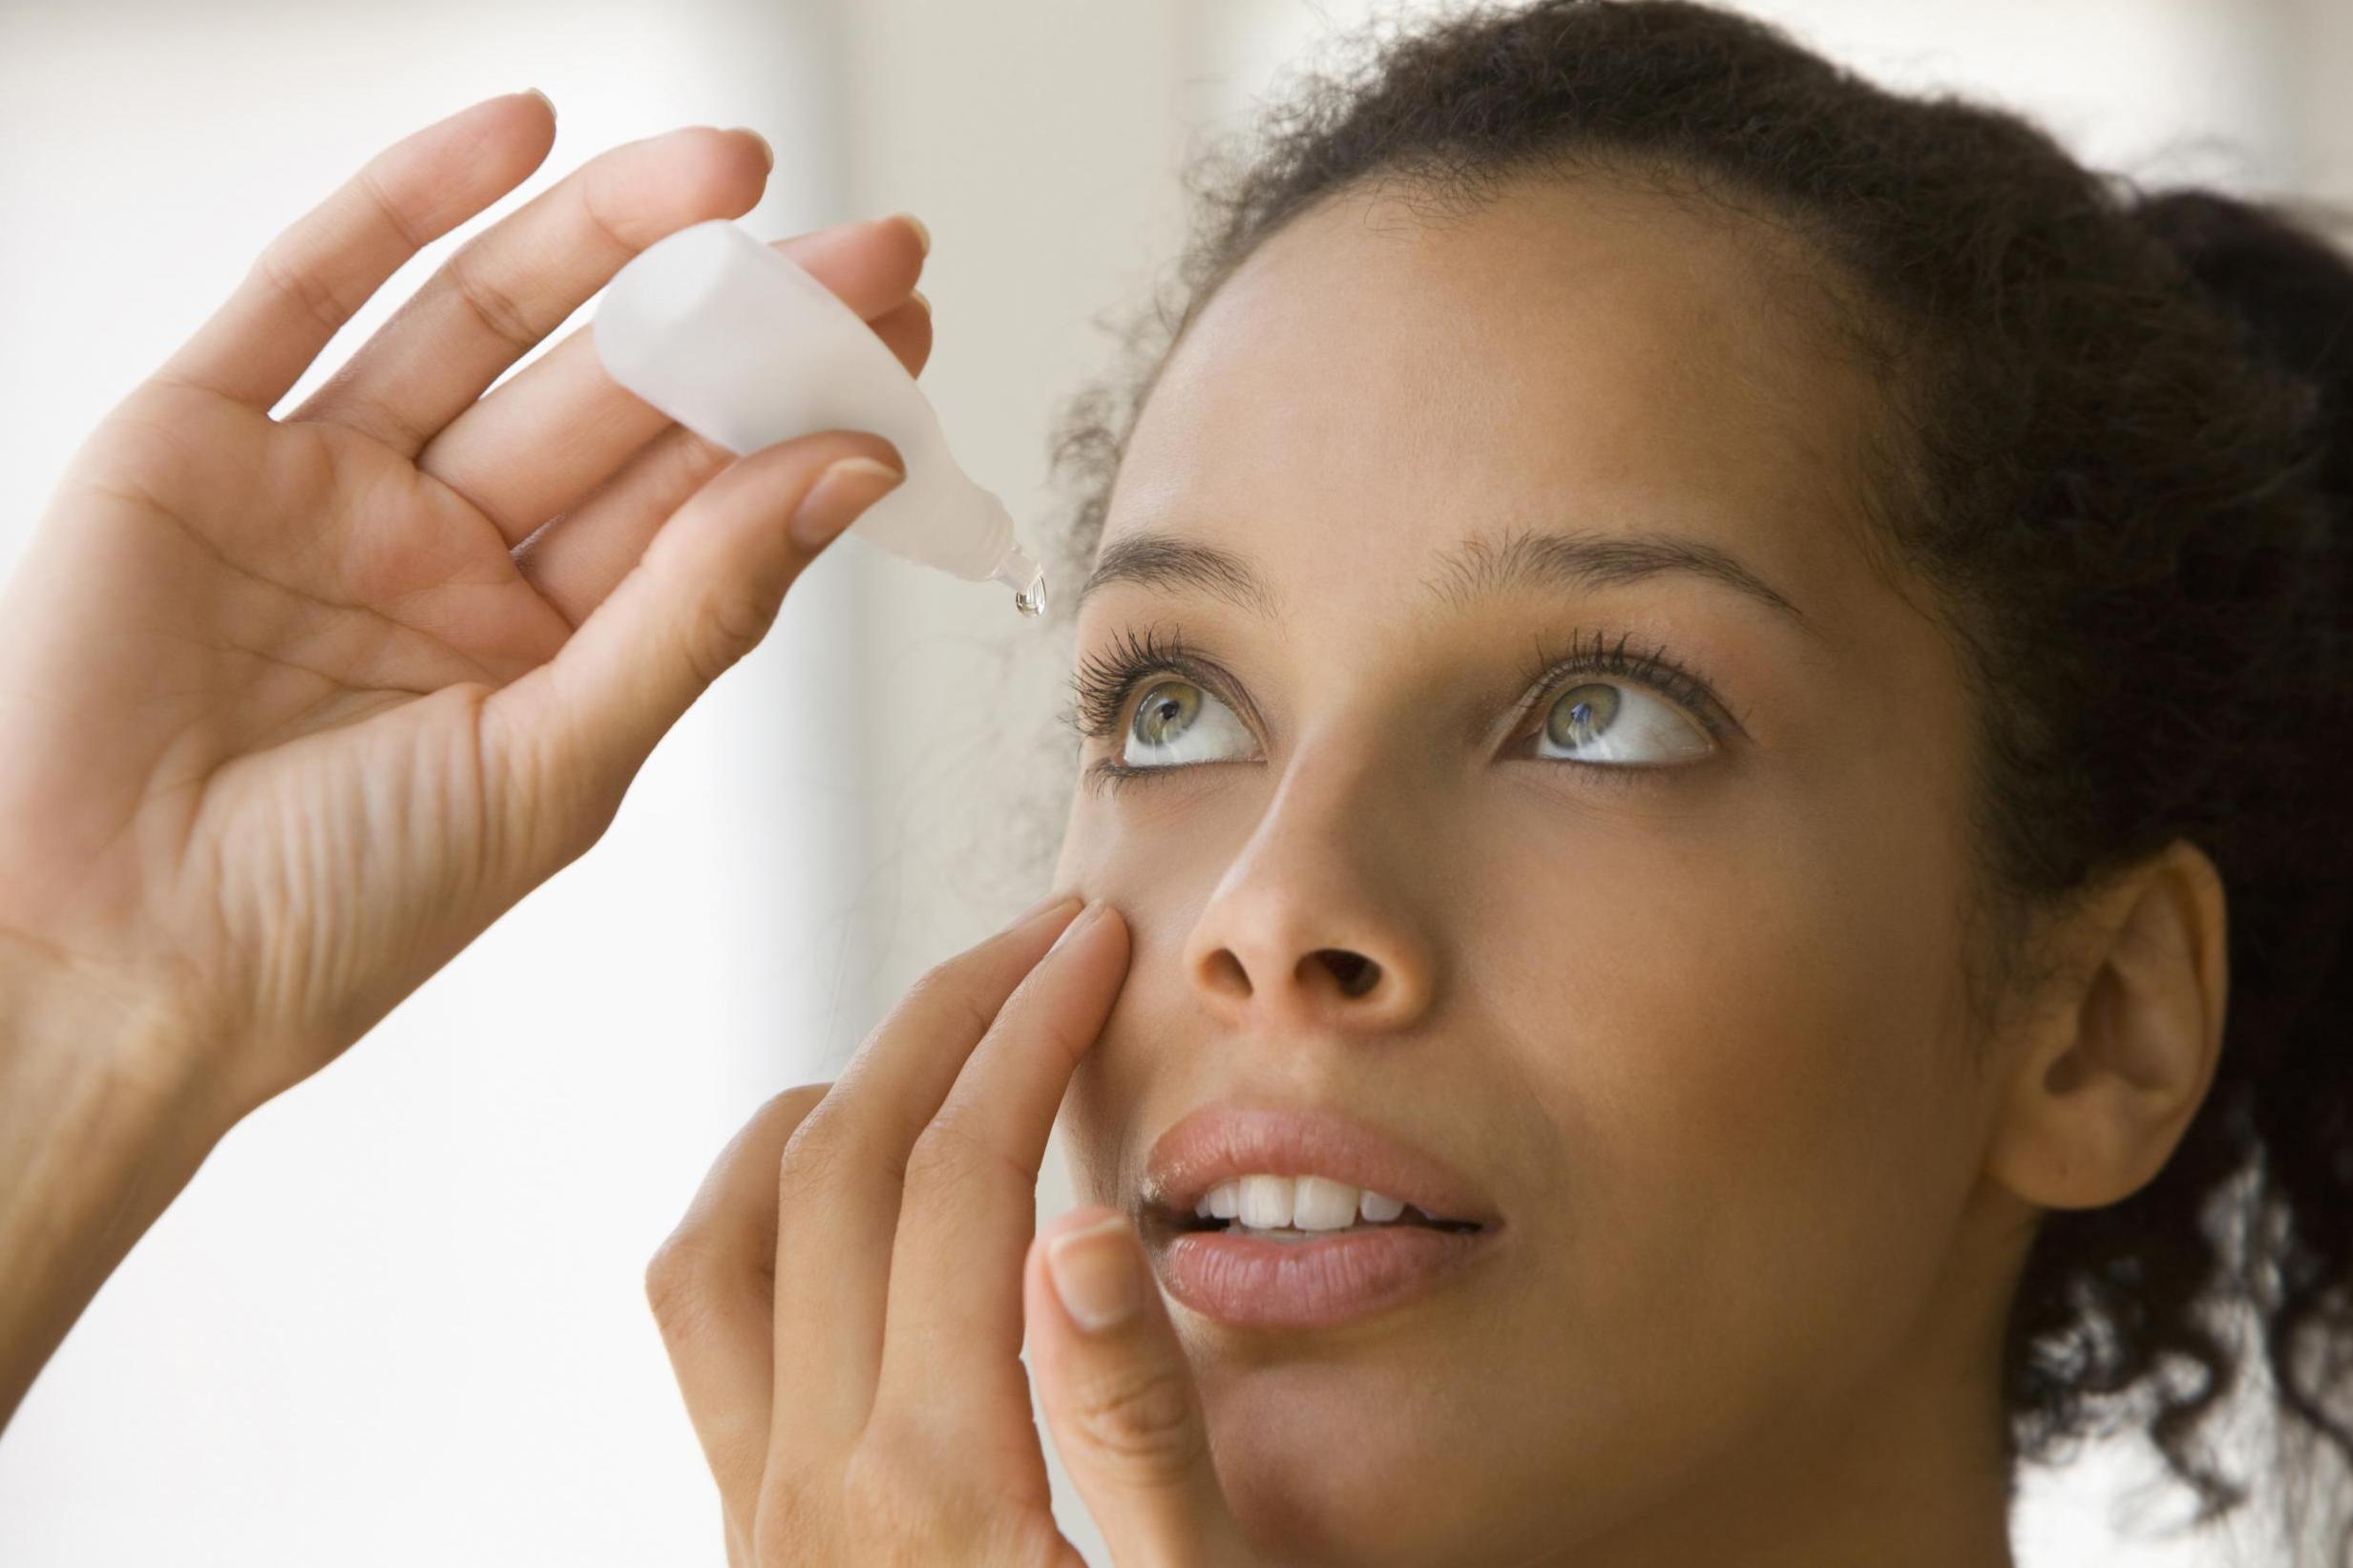 A scientific study could lead to the development of jet lag curing eye drops